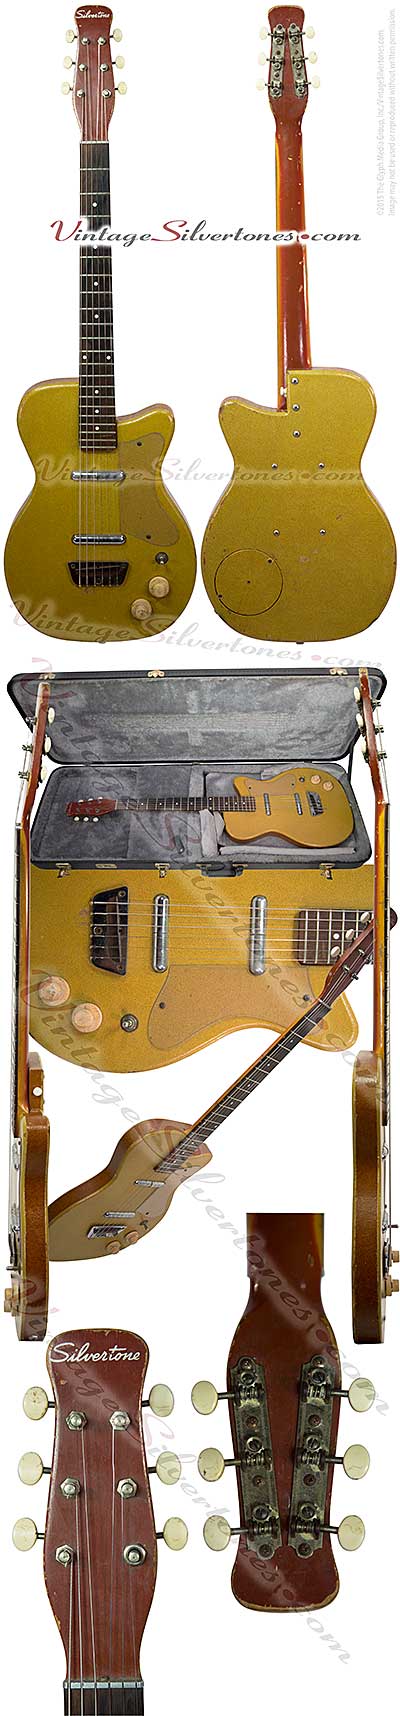 Silvertone 1359 made by Danelectro U2, two pickup, electric guitar, semi-hollow body, ginger tolex covered body with brown tolex binding, masonite body, lipstick pickup, made in 1956